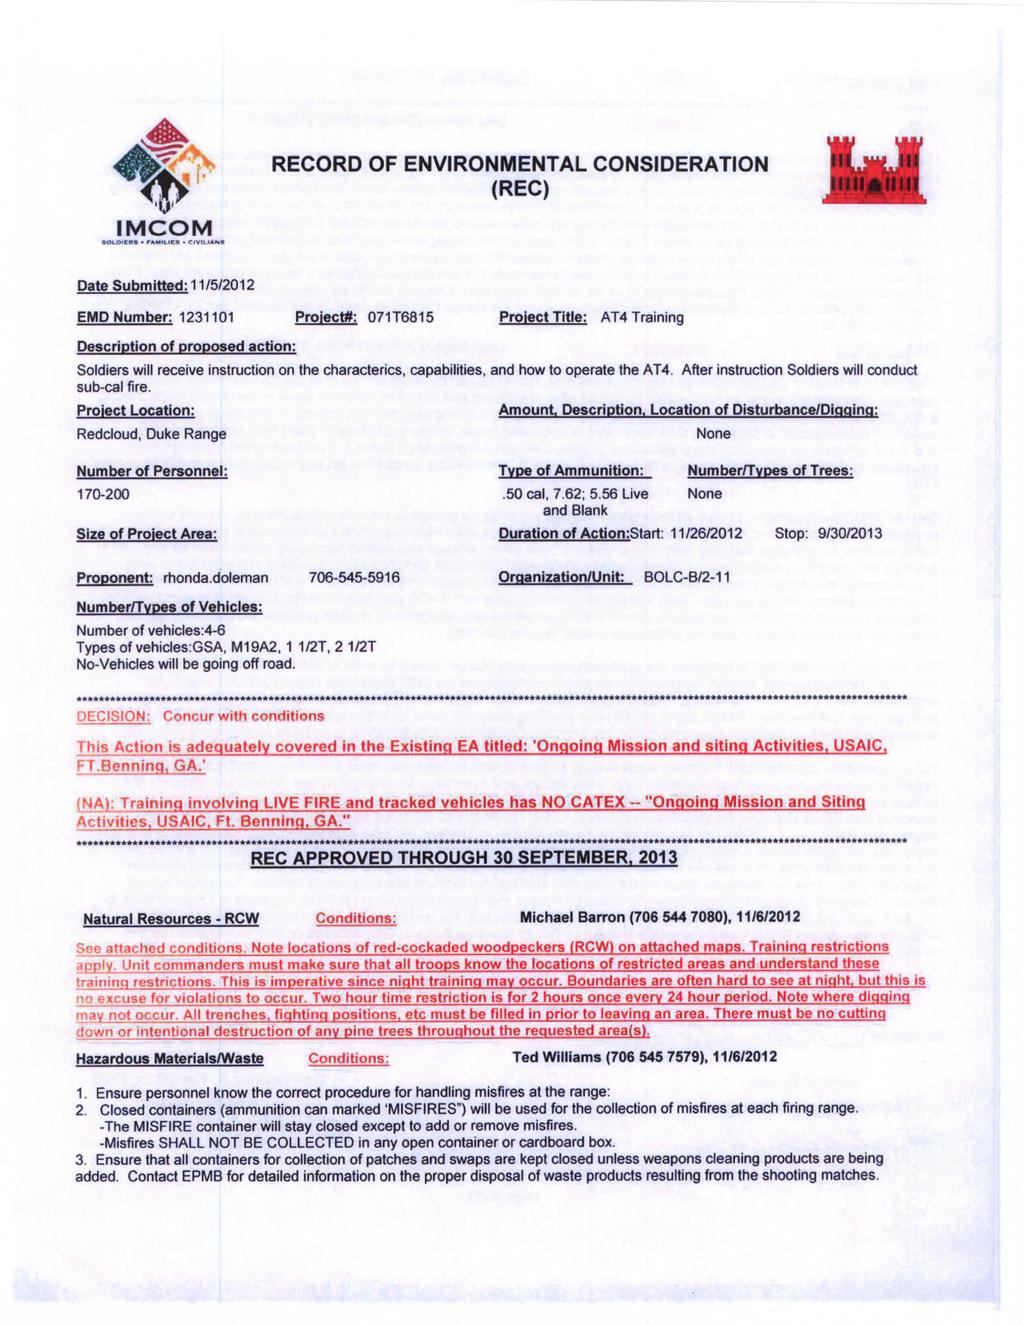 RECORD OF ENVIRONMENTAL CONSIDERATION (REC) Date Submitted: 11 /5/2012 EMD Number: 1231101 Project*: 071T6815 Project Title: AT4 Training Description of proposed action: Soldiers will receive